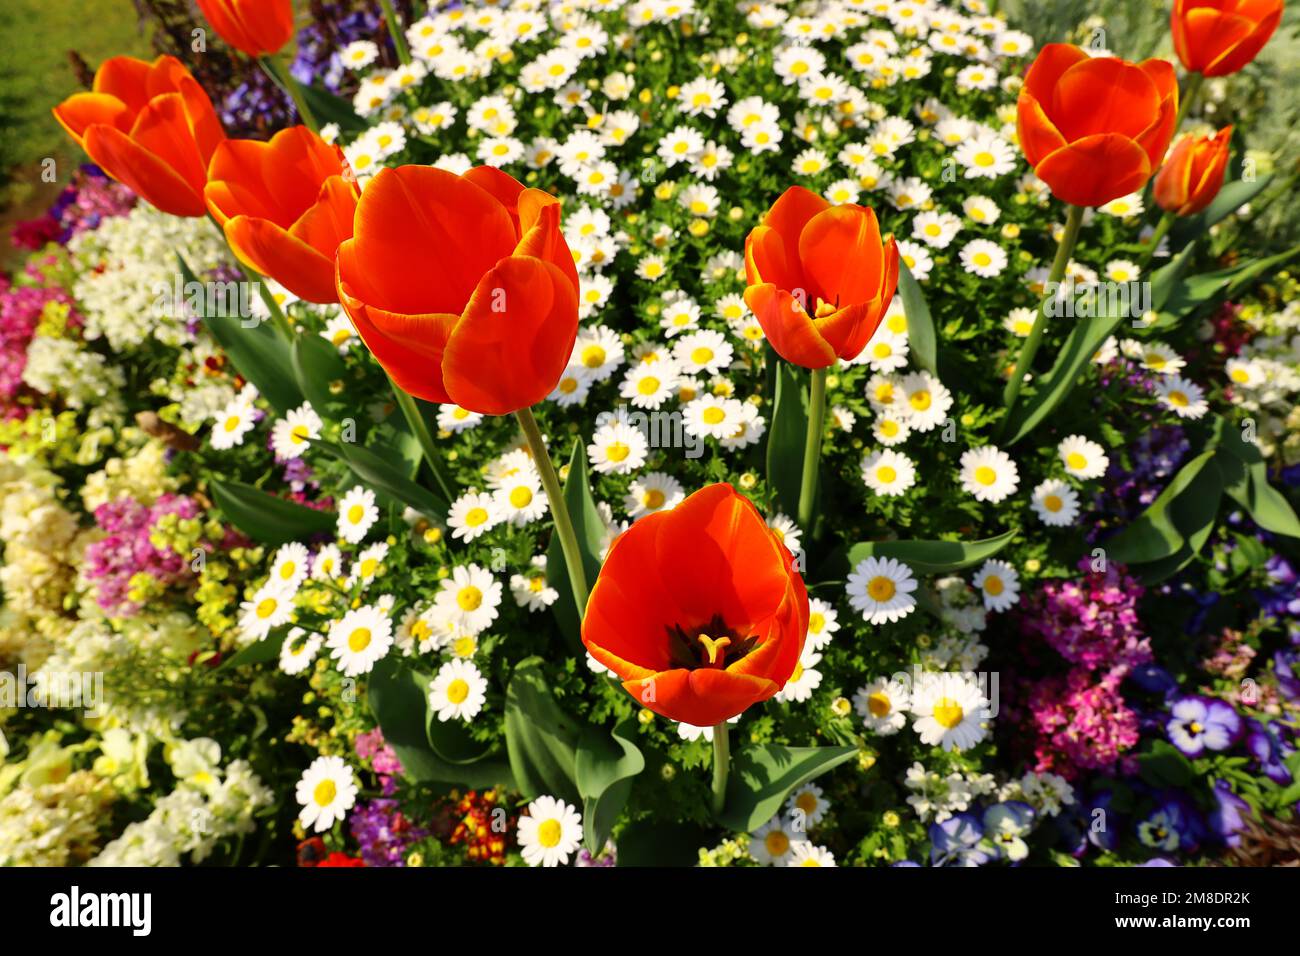 Red tulips blooming in the flower bed in the garden Stock Photo